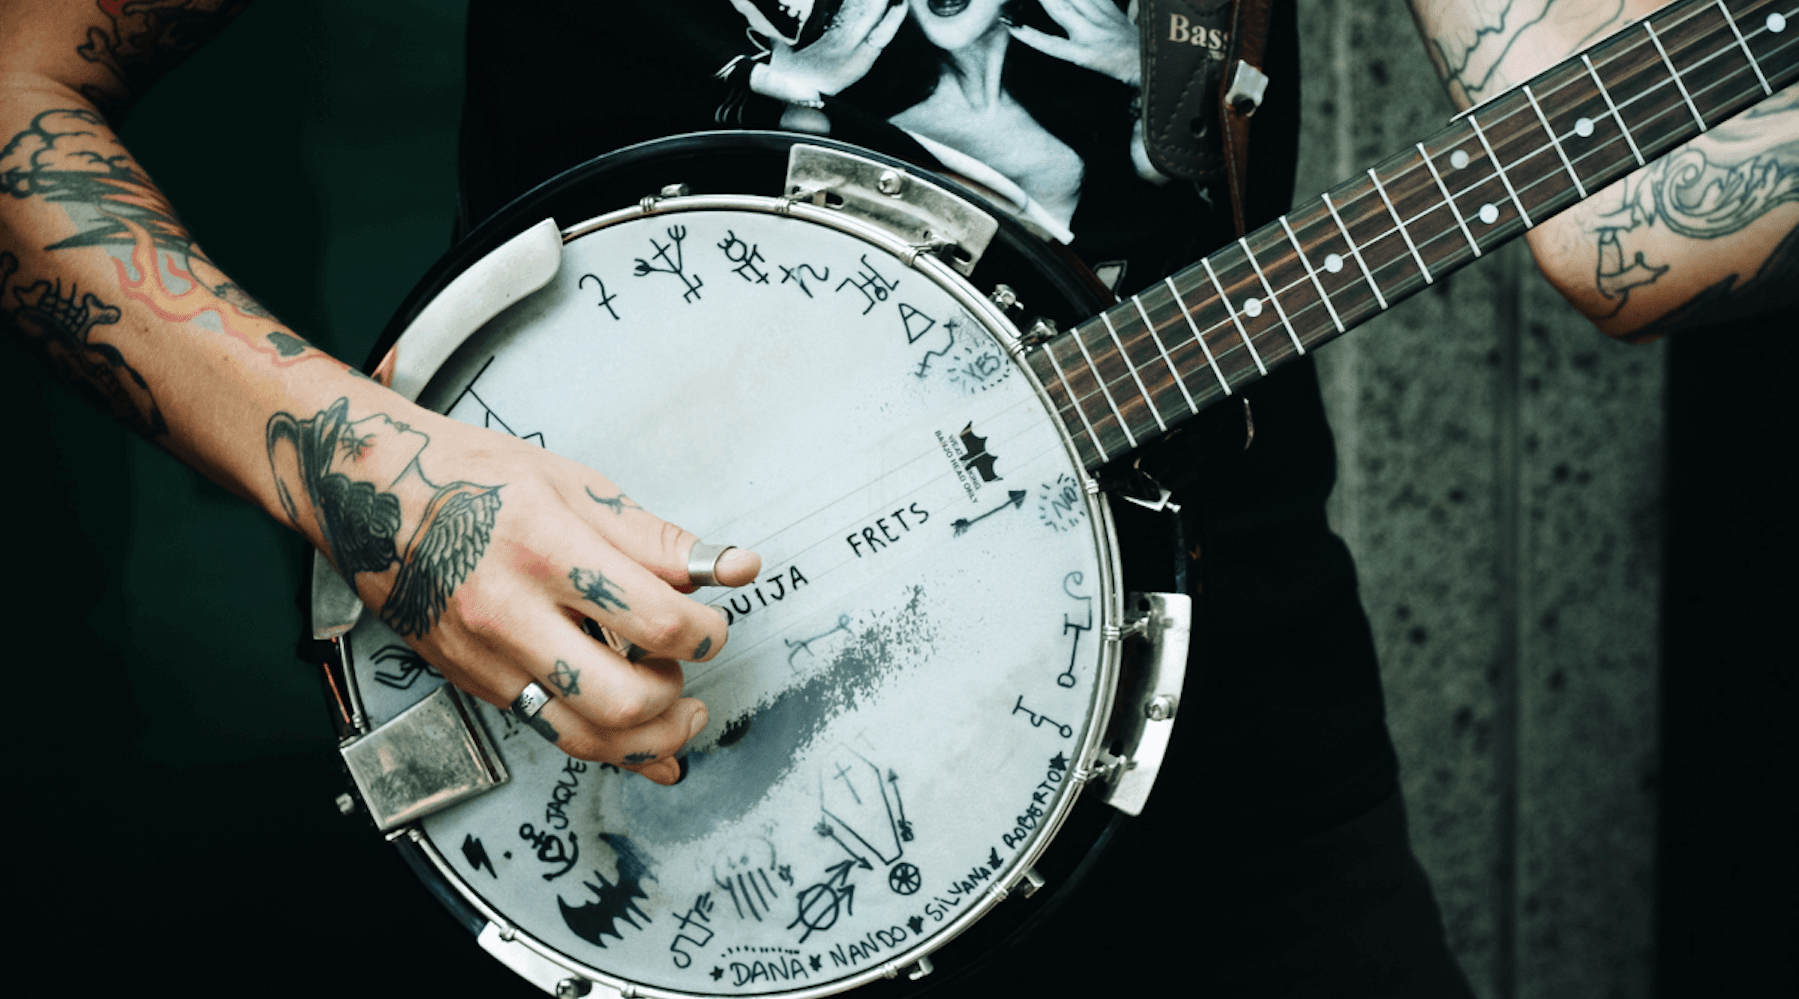 6 unlikely banjo songs (indie to EDM) we can’t stop playing